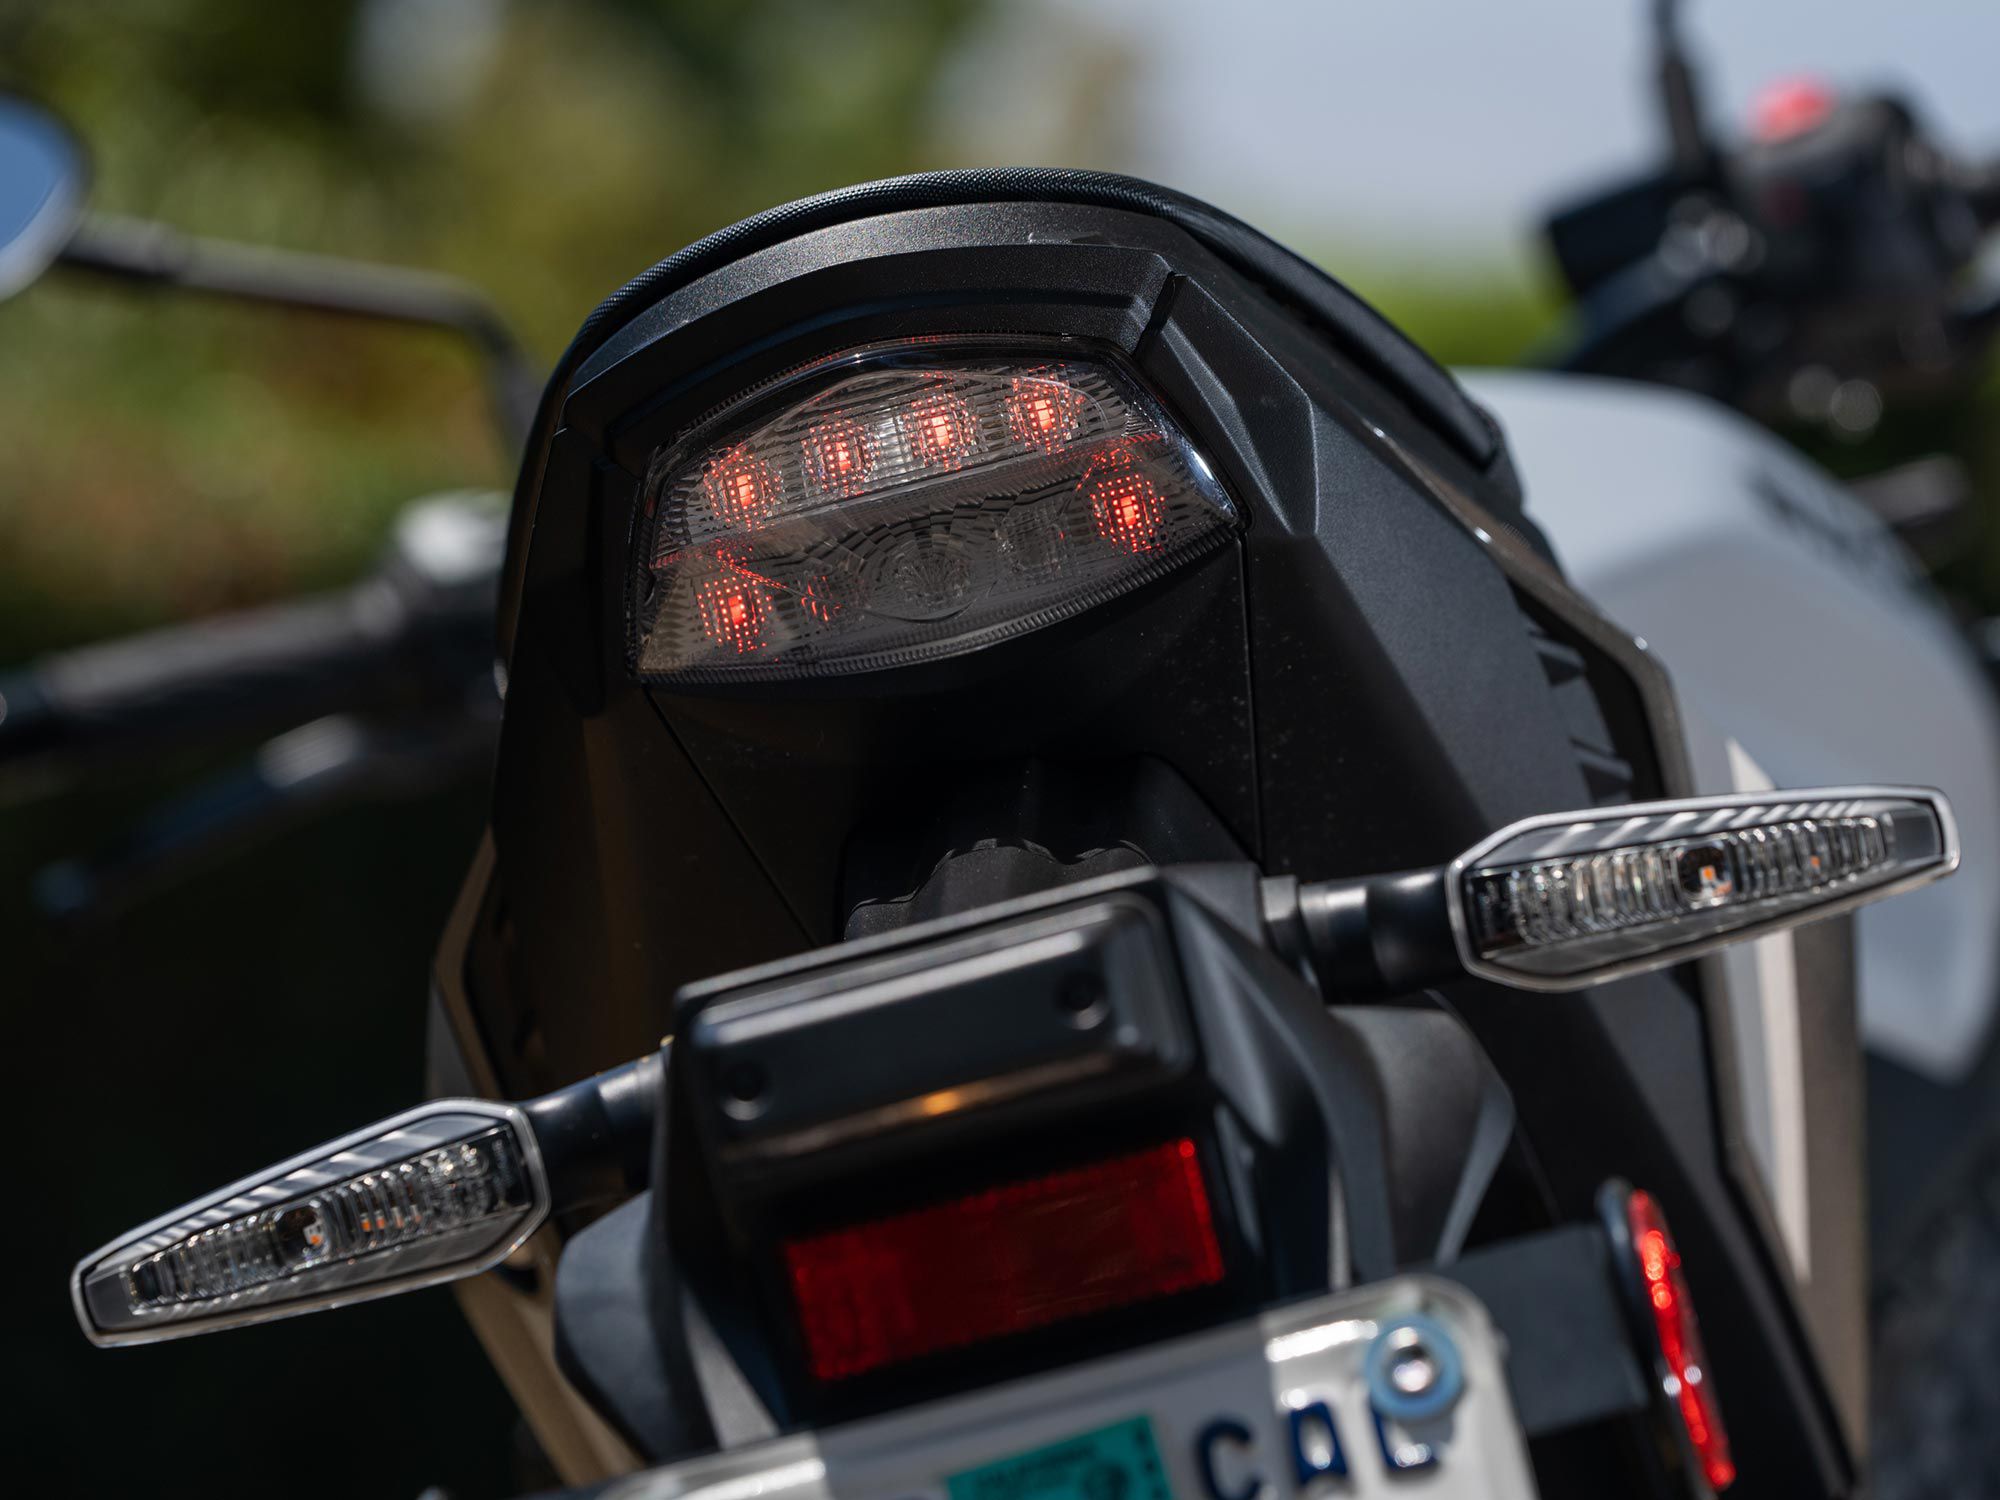 An LED taillight continues to adorn the 2022 GSX-S1000, however the turn signals are now LED as well.